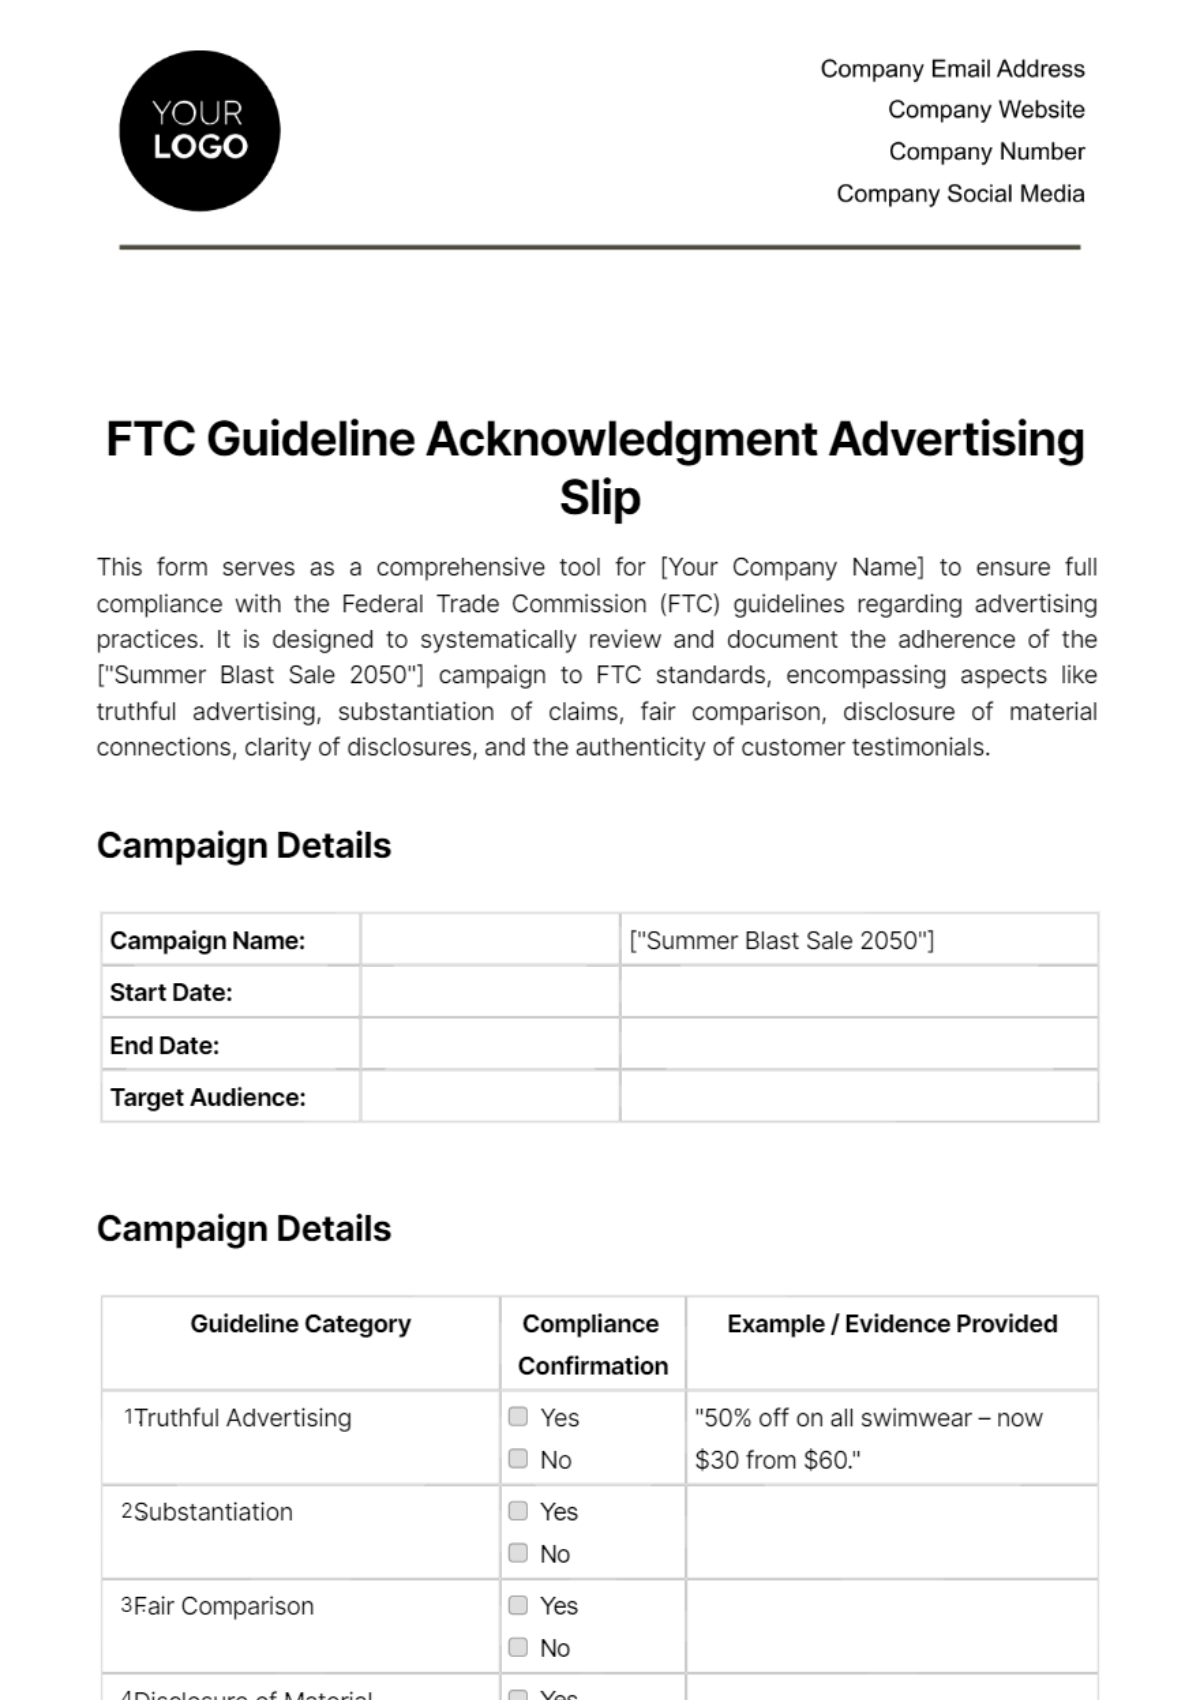 FTC Guideline Acknowledgment Advertising Slip Template